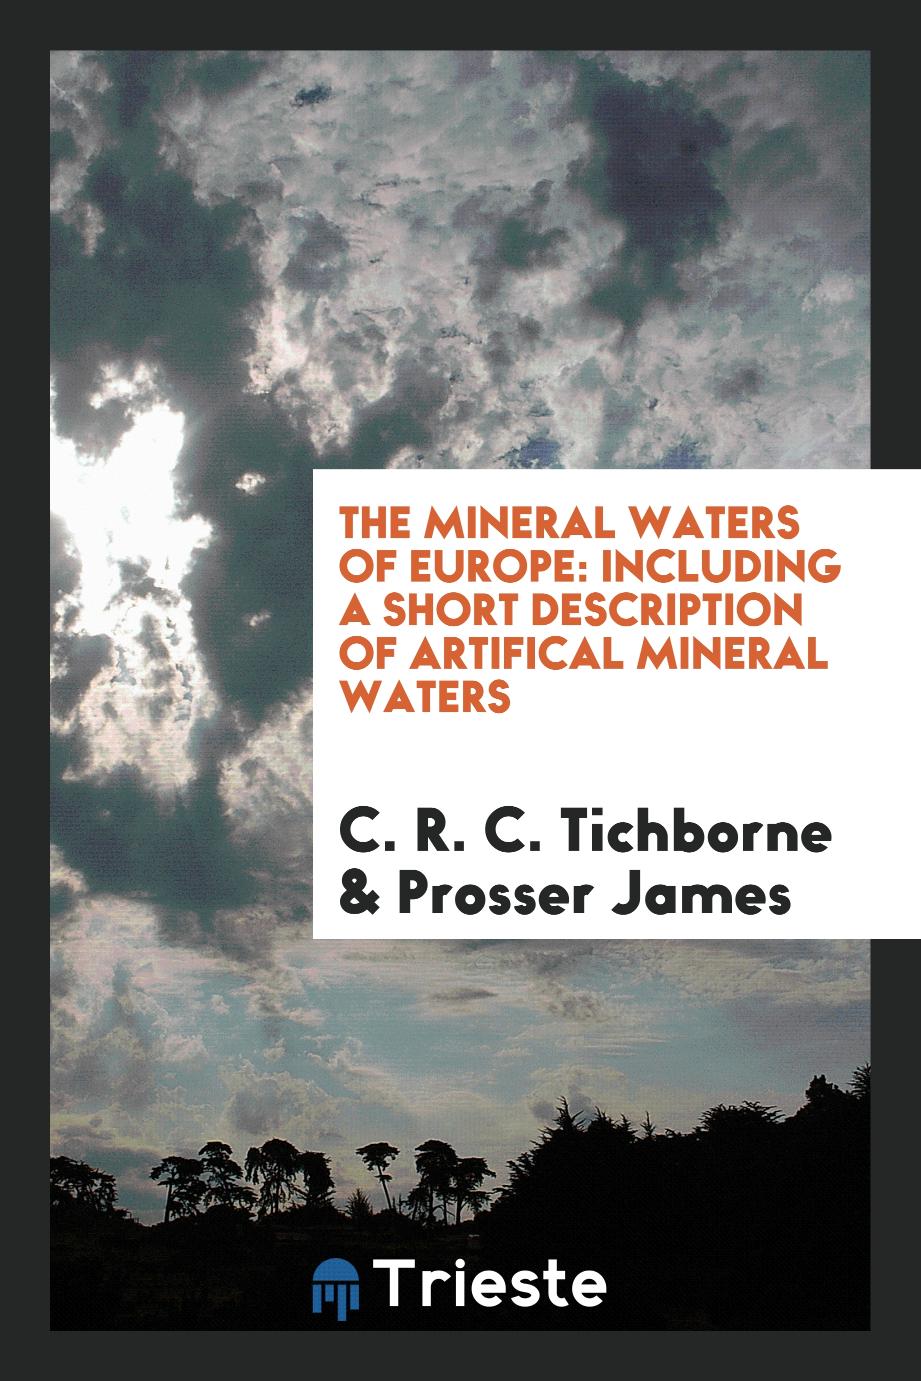 The Mineral Waters of Europe: Including a Short Description of Artifical Mineral Waters